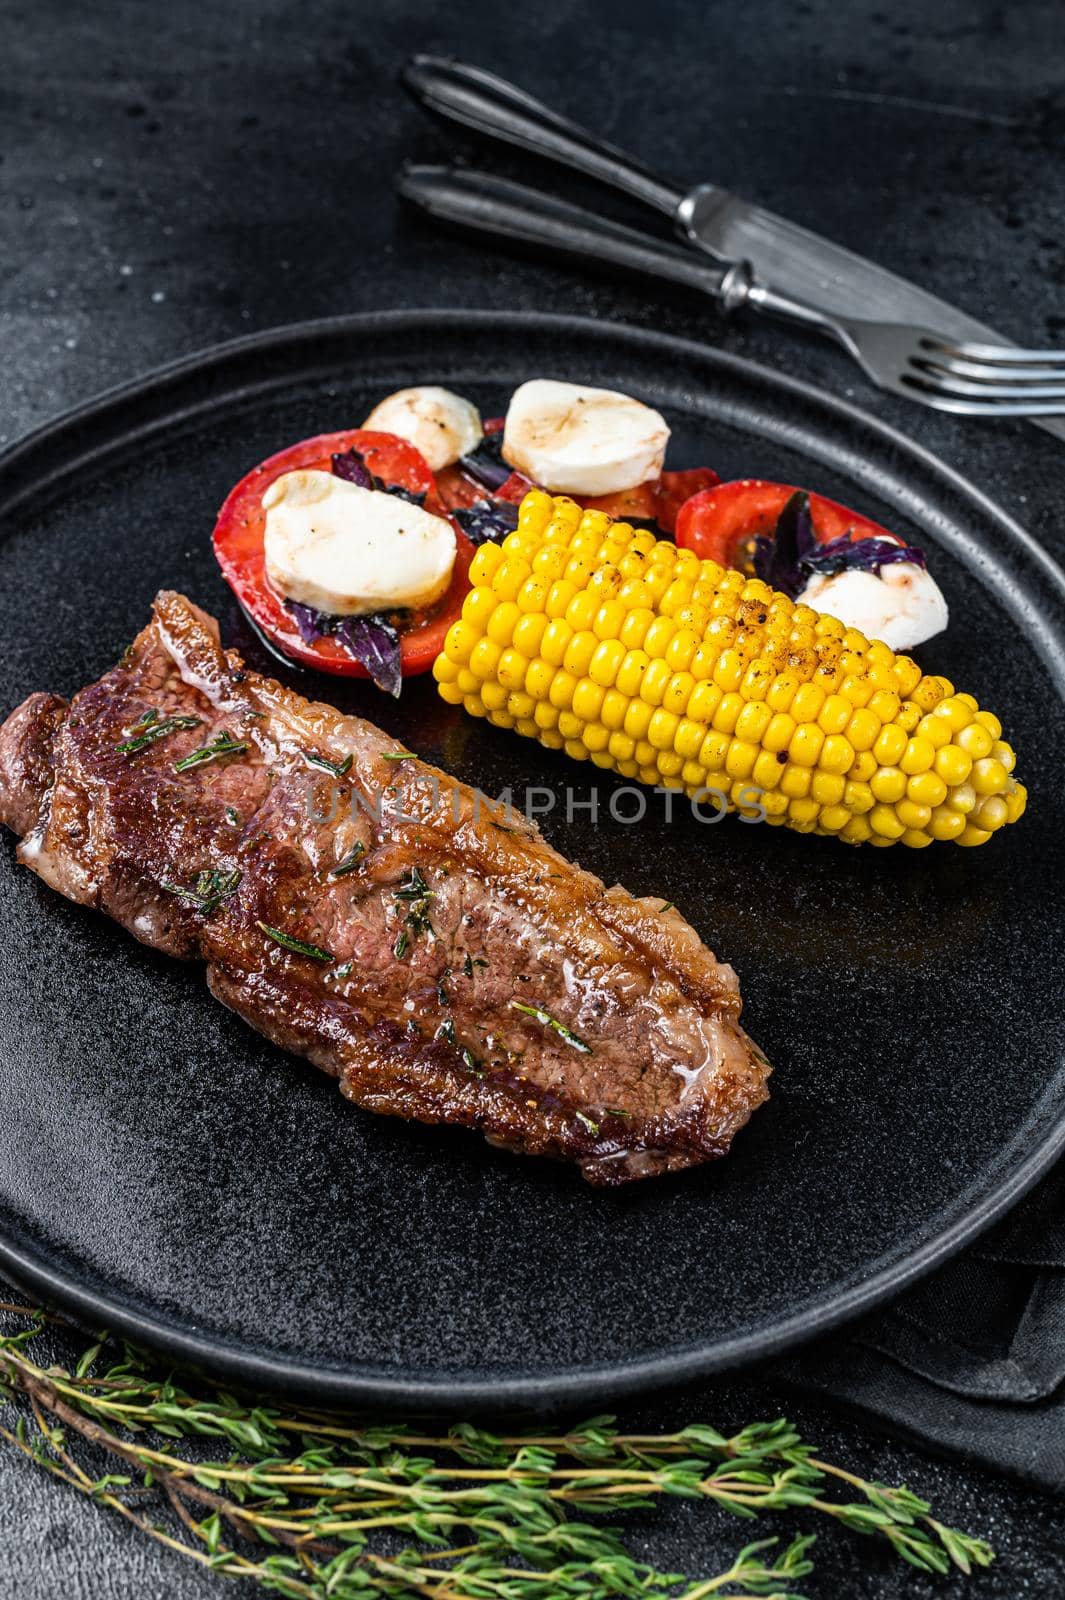 Roasted P beef steaks Striploin or New York on a plate with garnish. Black background. Top view.